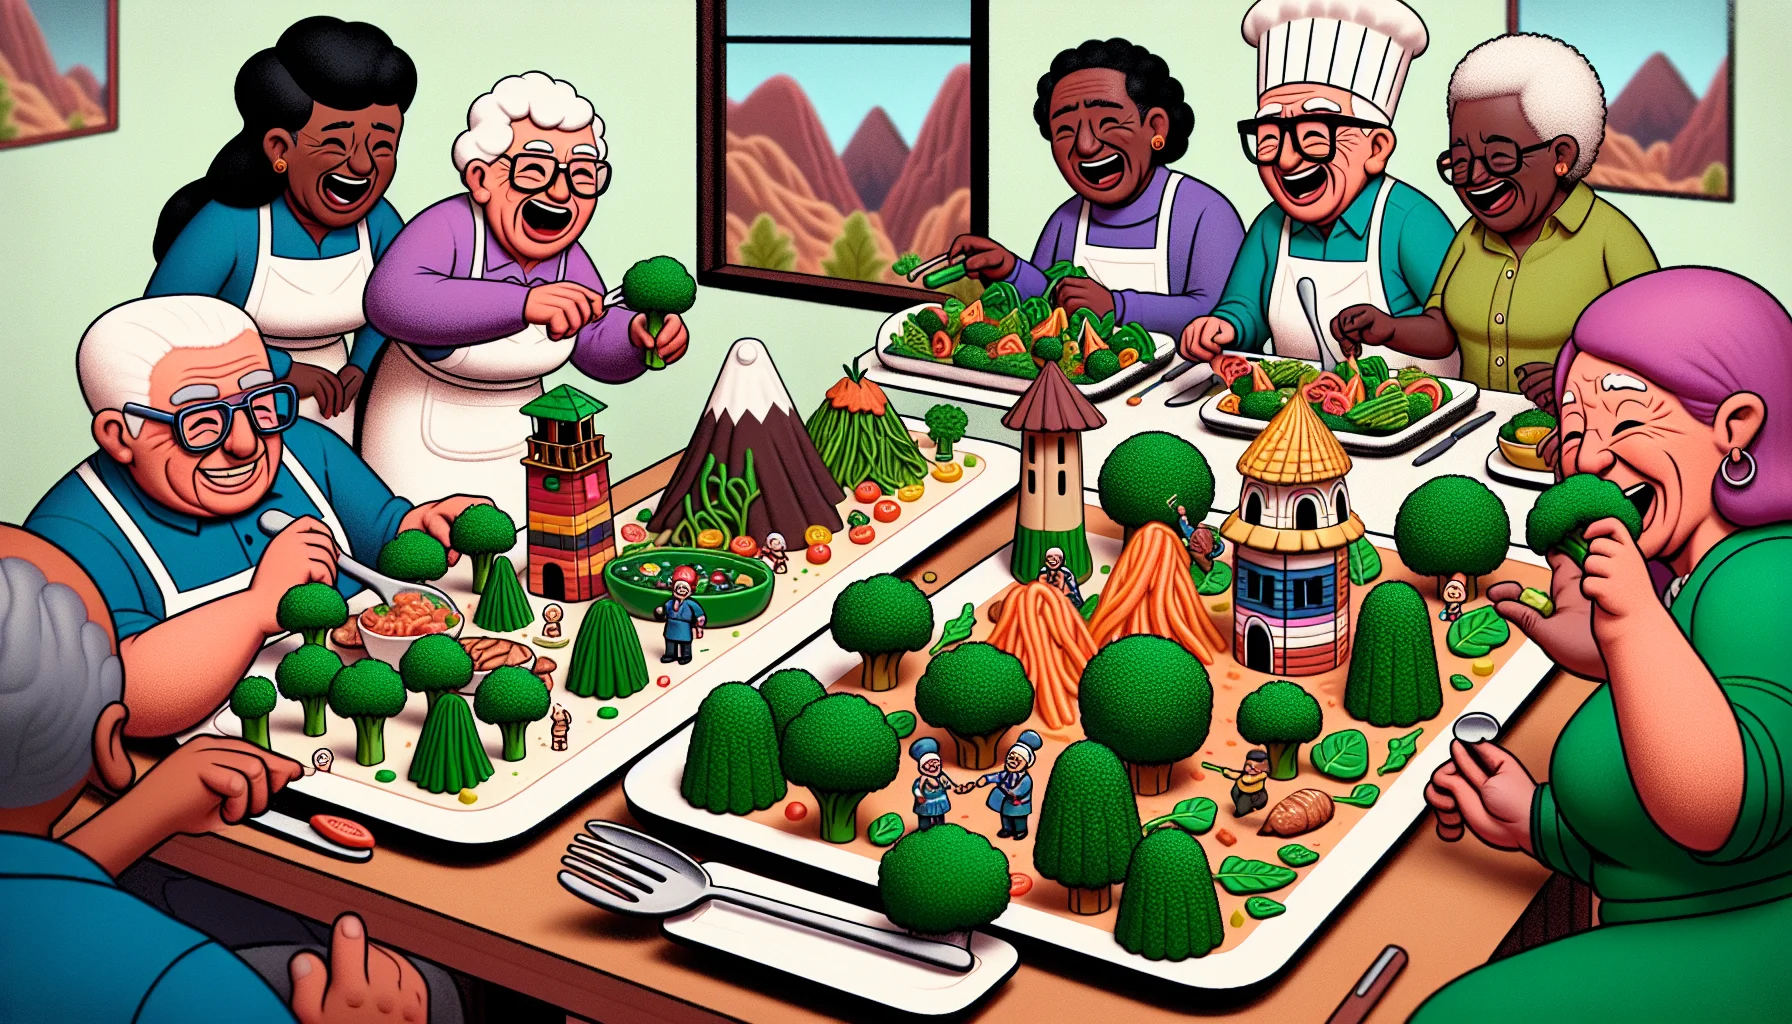 Imagine a hilarious scene in a senior citizen's club. There's a buzzing competition of 'creative food plating' happening. In it, animated elderly individuals of various descents such as Hispanic, Middle-Eastern and Black, are engaged in presenting their high-fiber, low-carb meals. A Caucasian man is carefully arranging broccoli trees in a landscape, where lean chicken mountains stand tall. A South Asian woman giggles as she sculpts a spinach fort protected by zucchini soldiers. Meanwhile, a black woman chuckles wholeheartedly displaying her colorful salad fashioned as a vintage hat. This lively encounter accentuates the fun and creative side of maintaining a healthy diet.